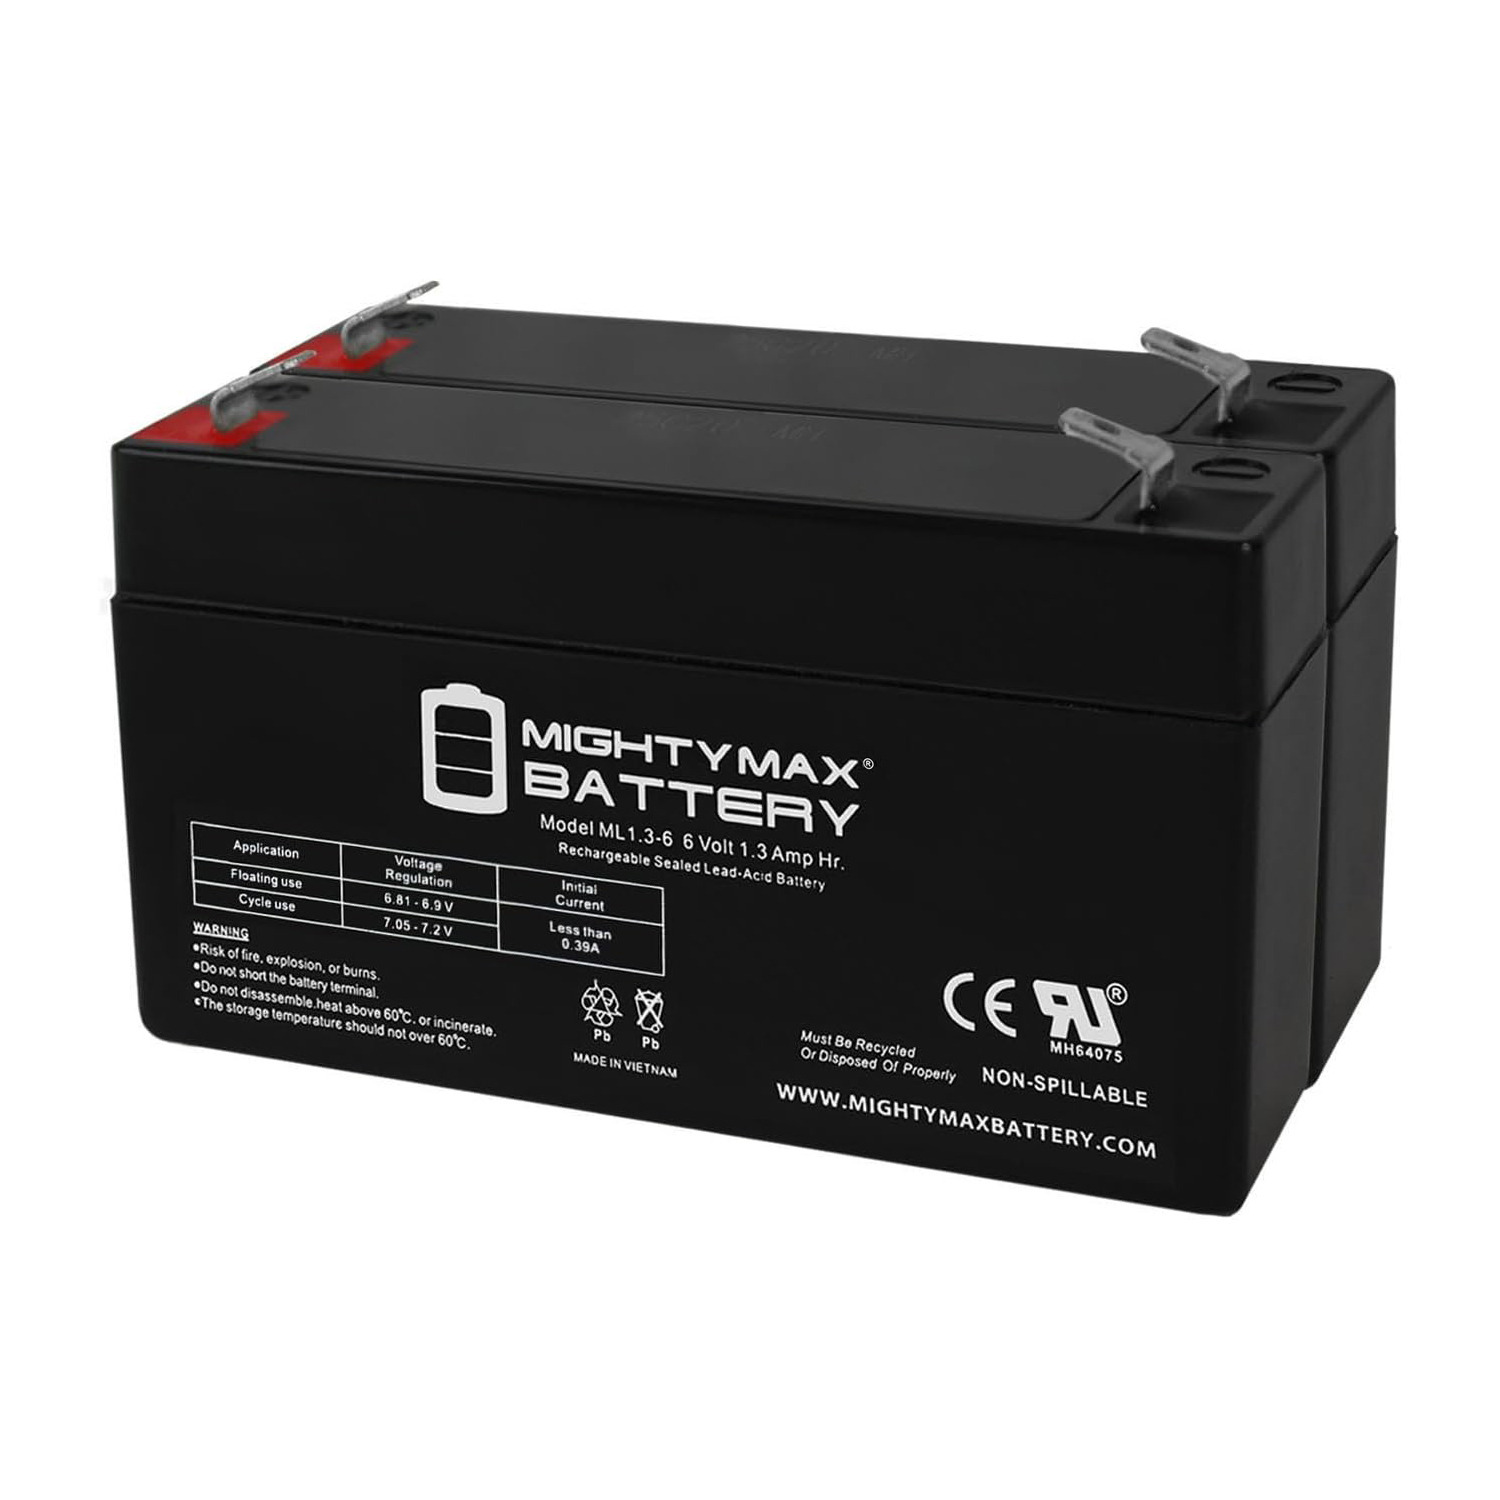 6V 1.3Ah SLA Replacement Battery for Intellipower ital PS612 - 2 Pack